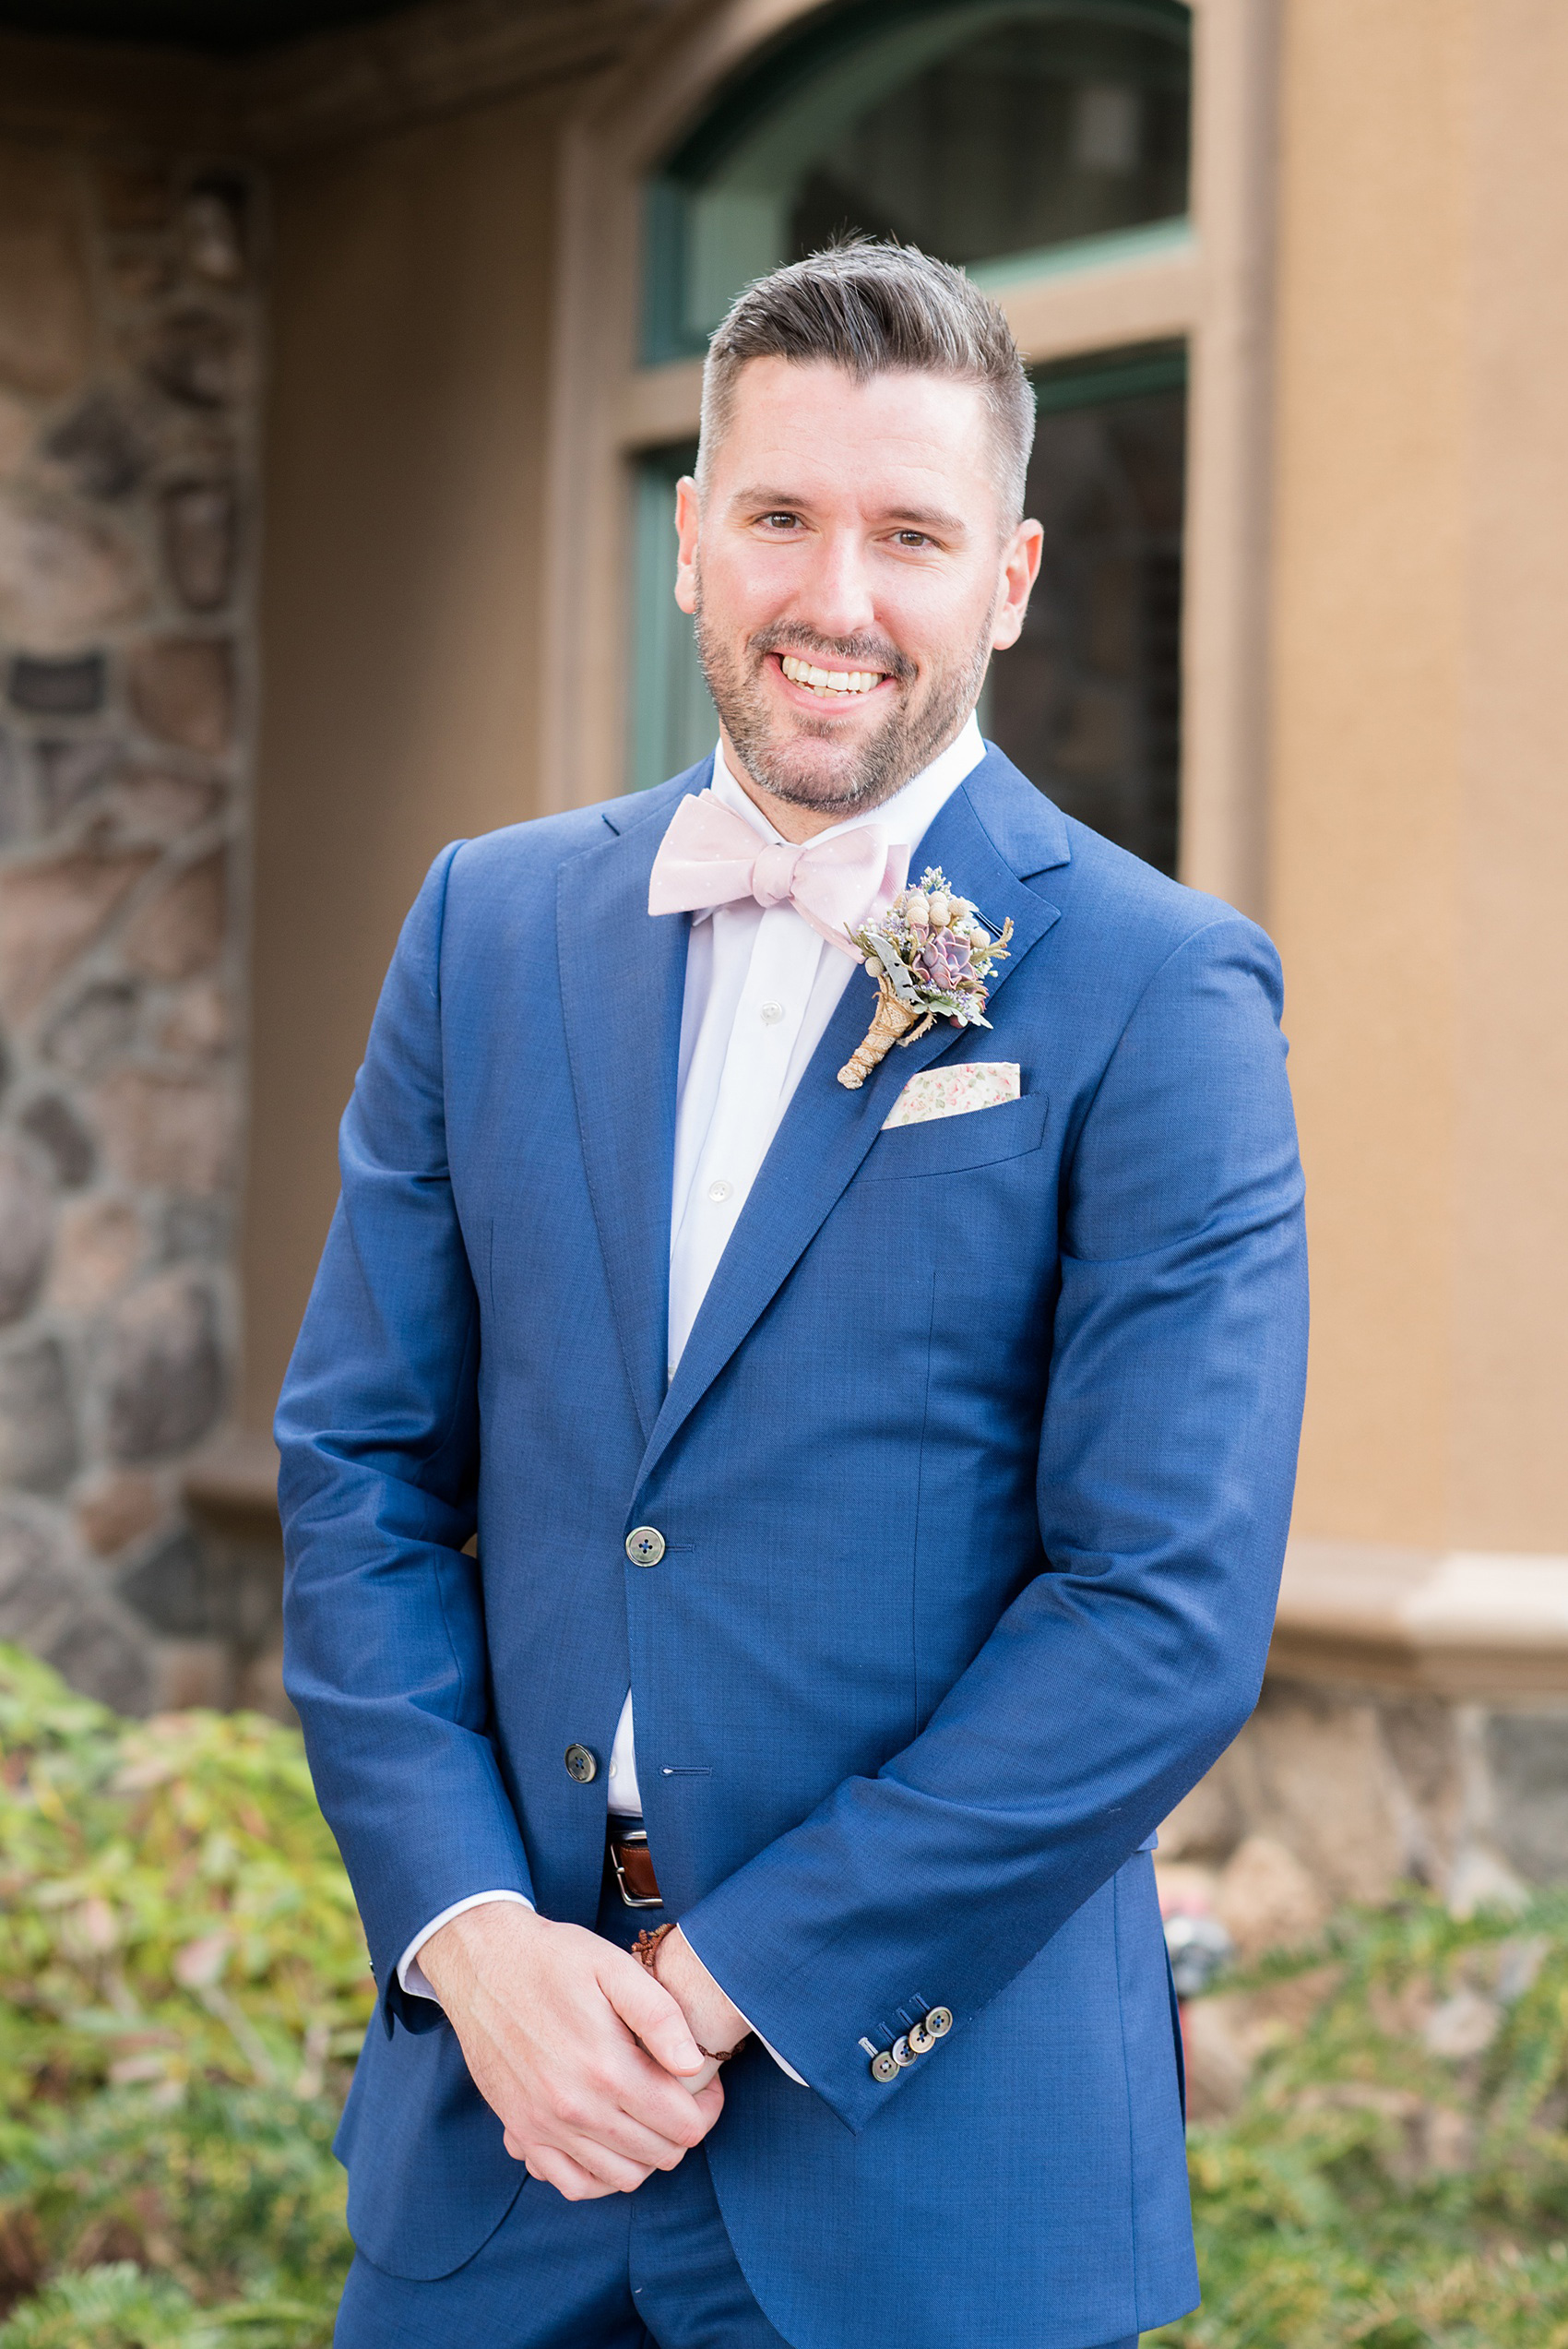 Crystal Springs Resort wedding photos in New Jersey, with photographer Mikkel Paige Photography. The couple’s spring wedding had an outdoor ceremony with photos at this rustic, woodsy venue showing their blue and pink palette decor from getting ready to their reception. This picture shows the groom in his custom navy blue suit with a succulent boutonniere. Click through to see their complete wedding recap! #NewJerseywedding #MikkelPaige #NJweddingphotographer #NJphotographer #customsuit #groom #weddingdetails #pinkbowtie 